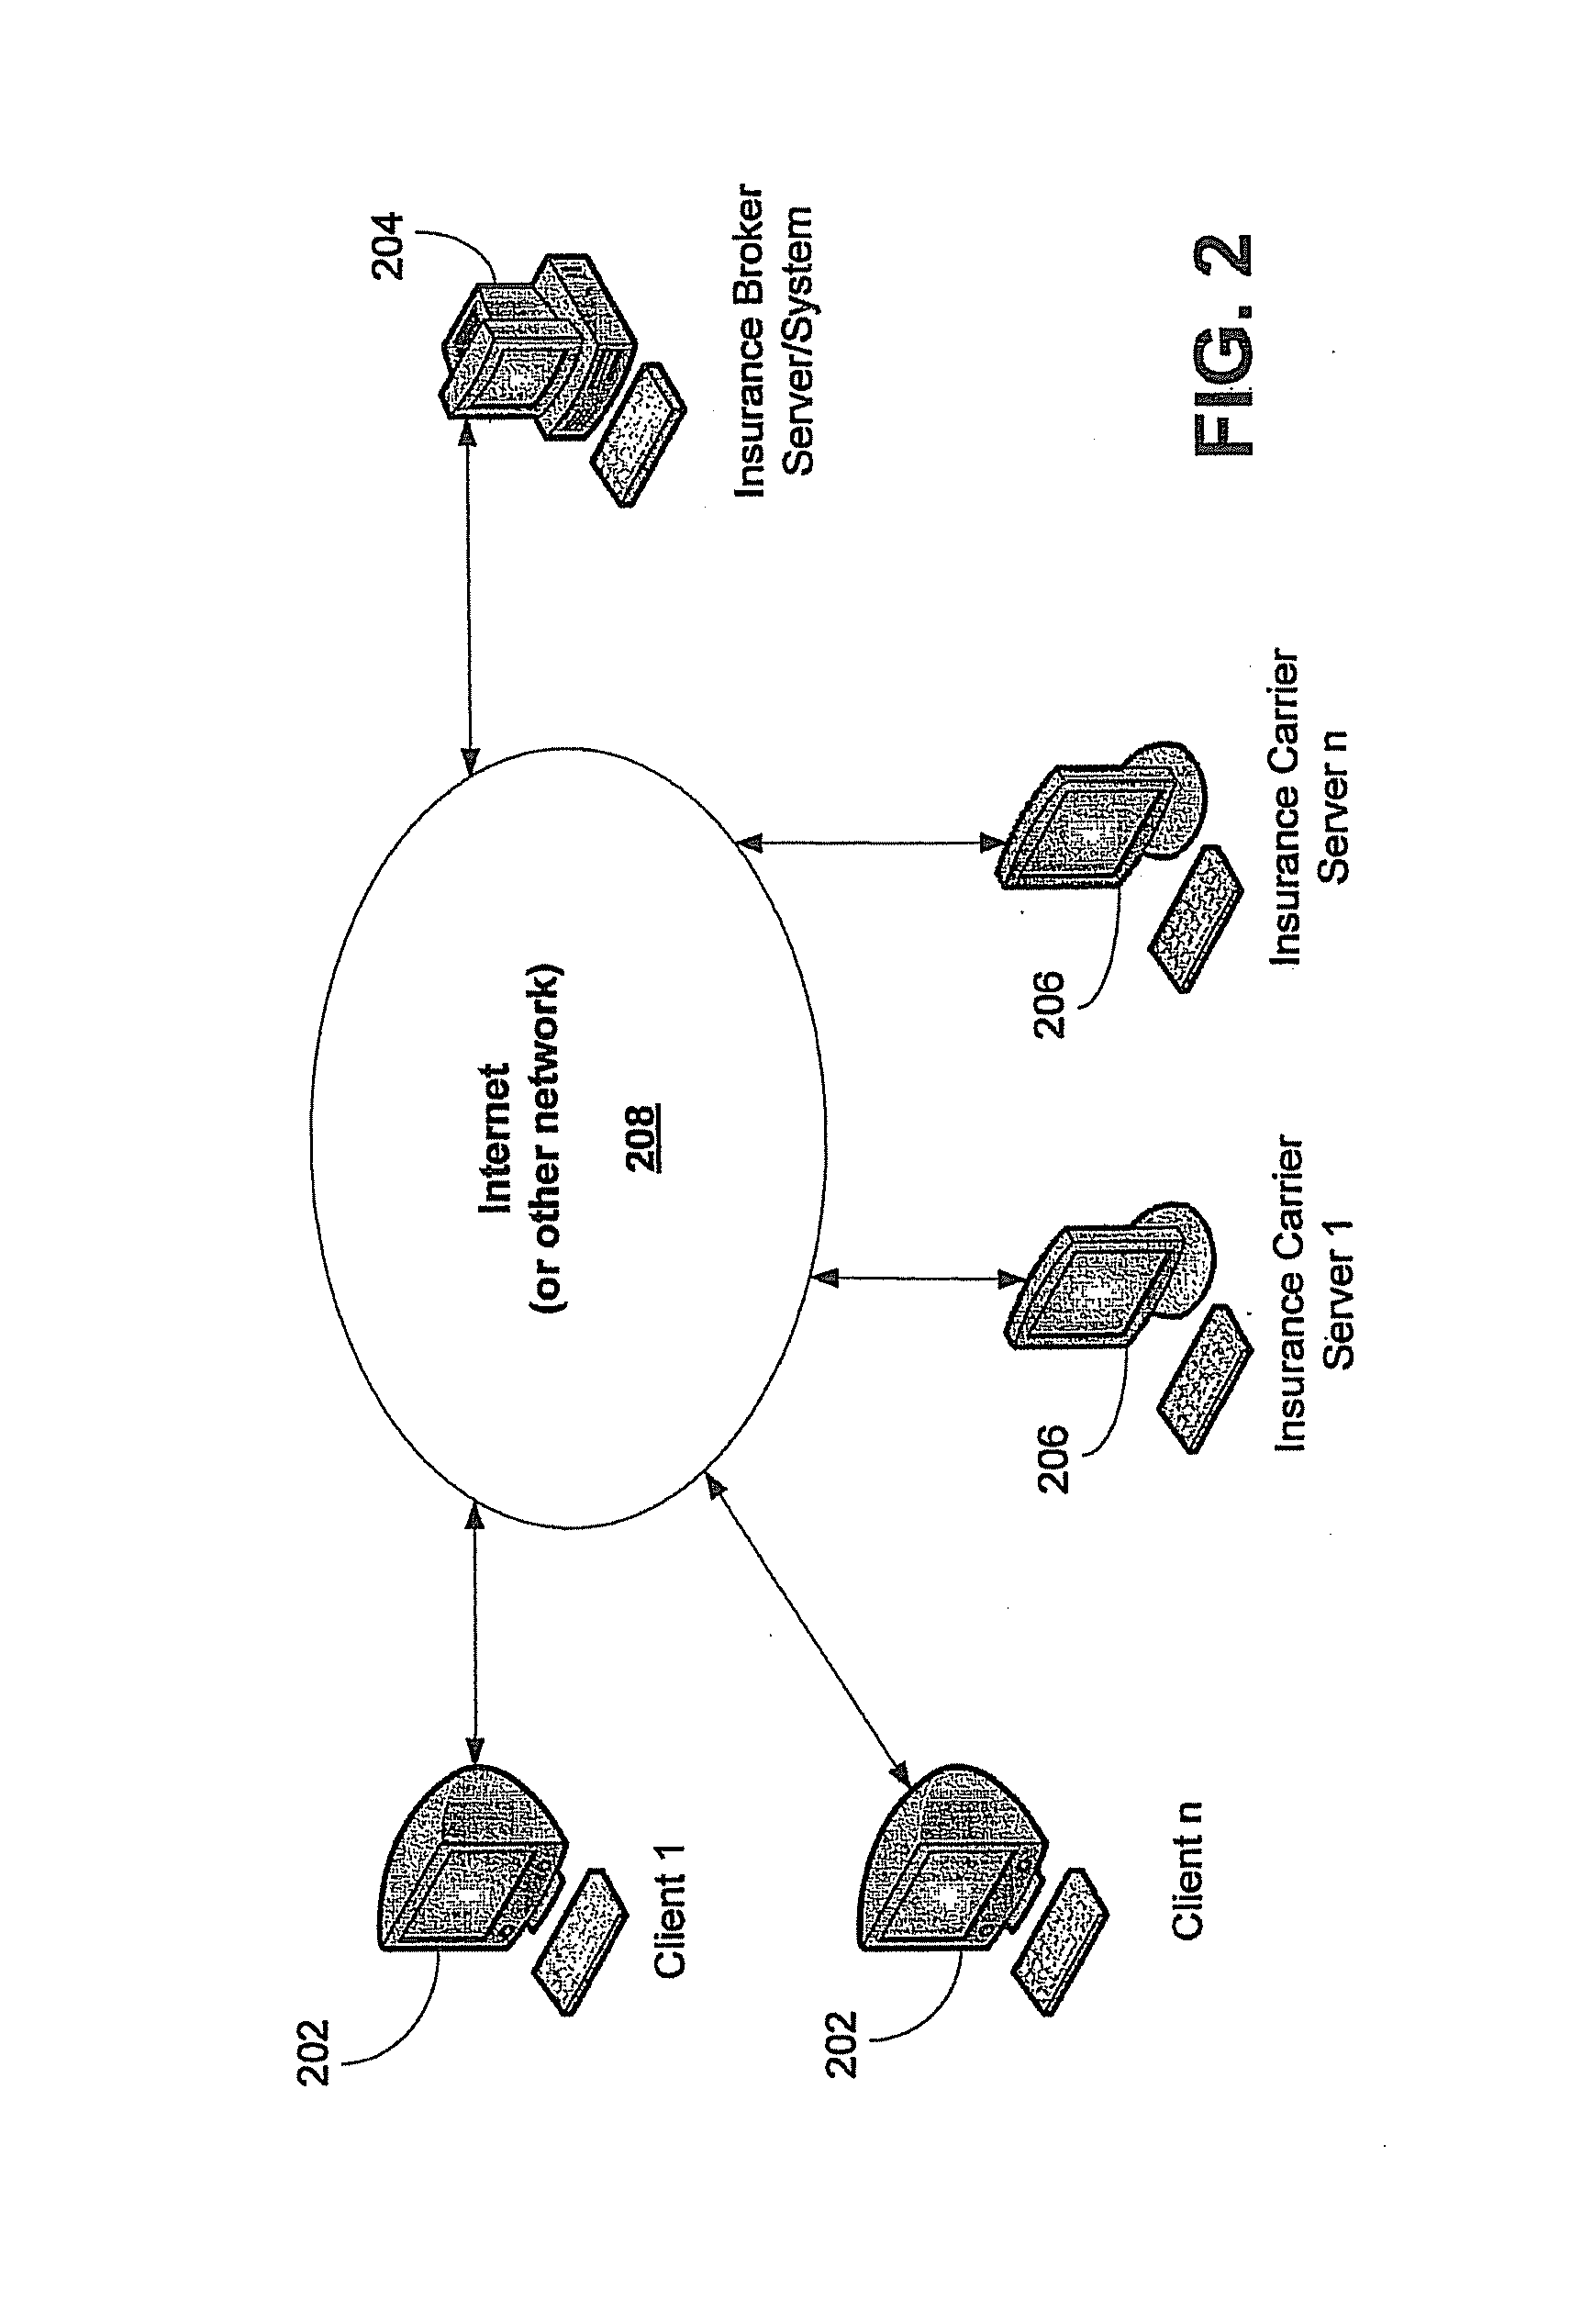 System and method for selecting an insurance carrier